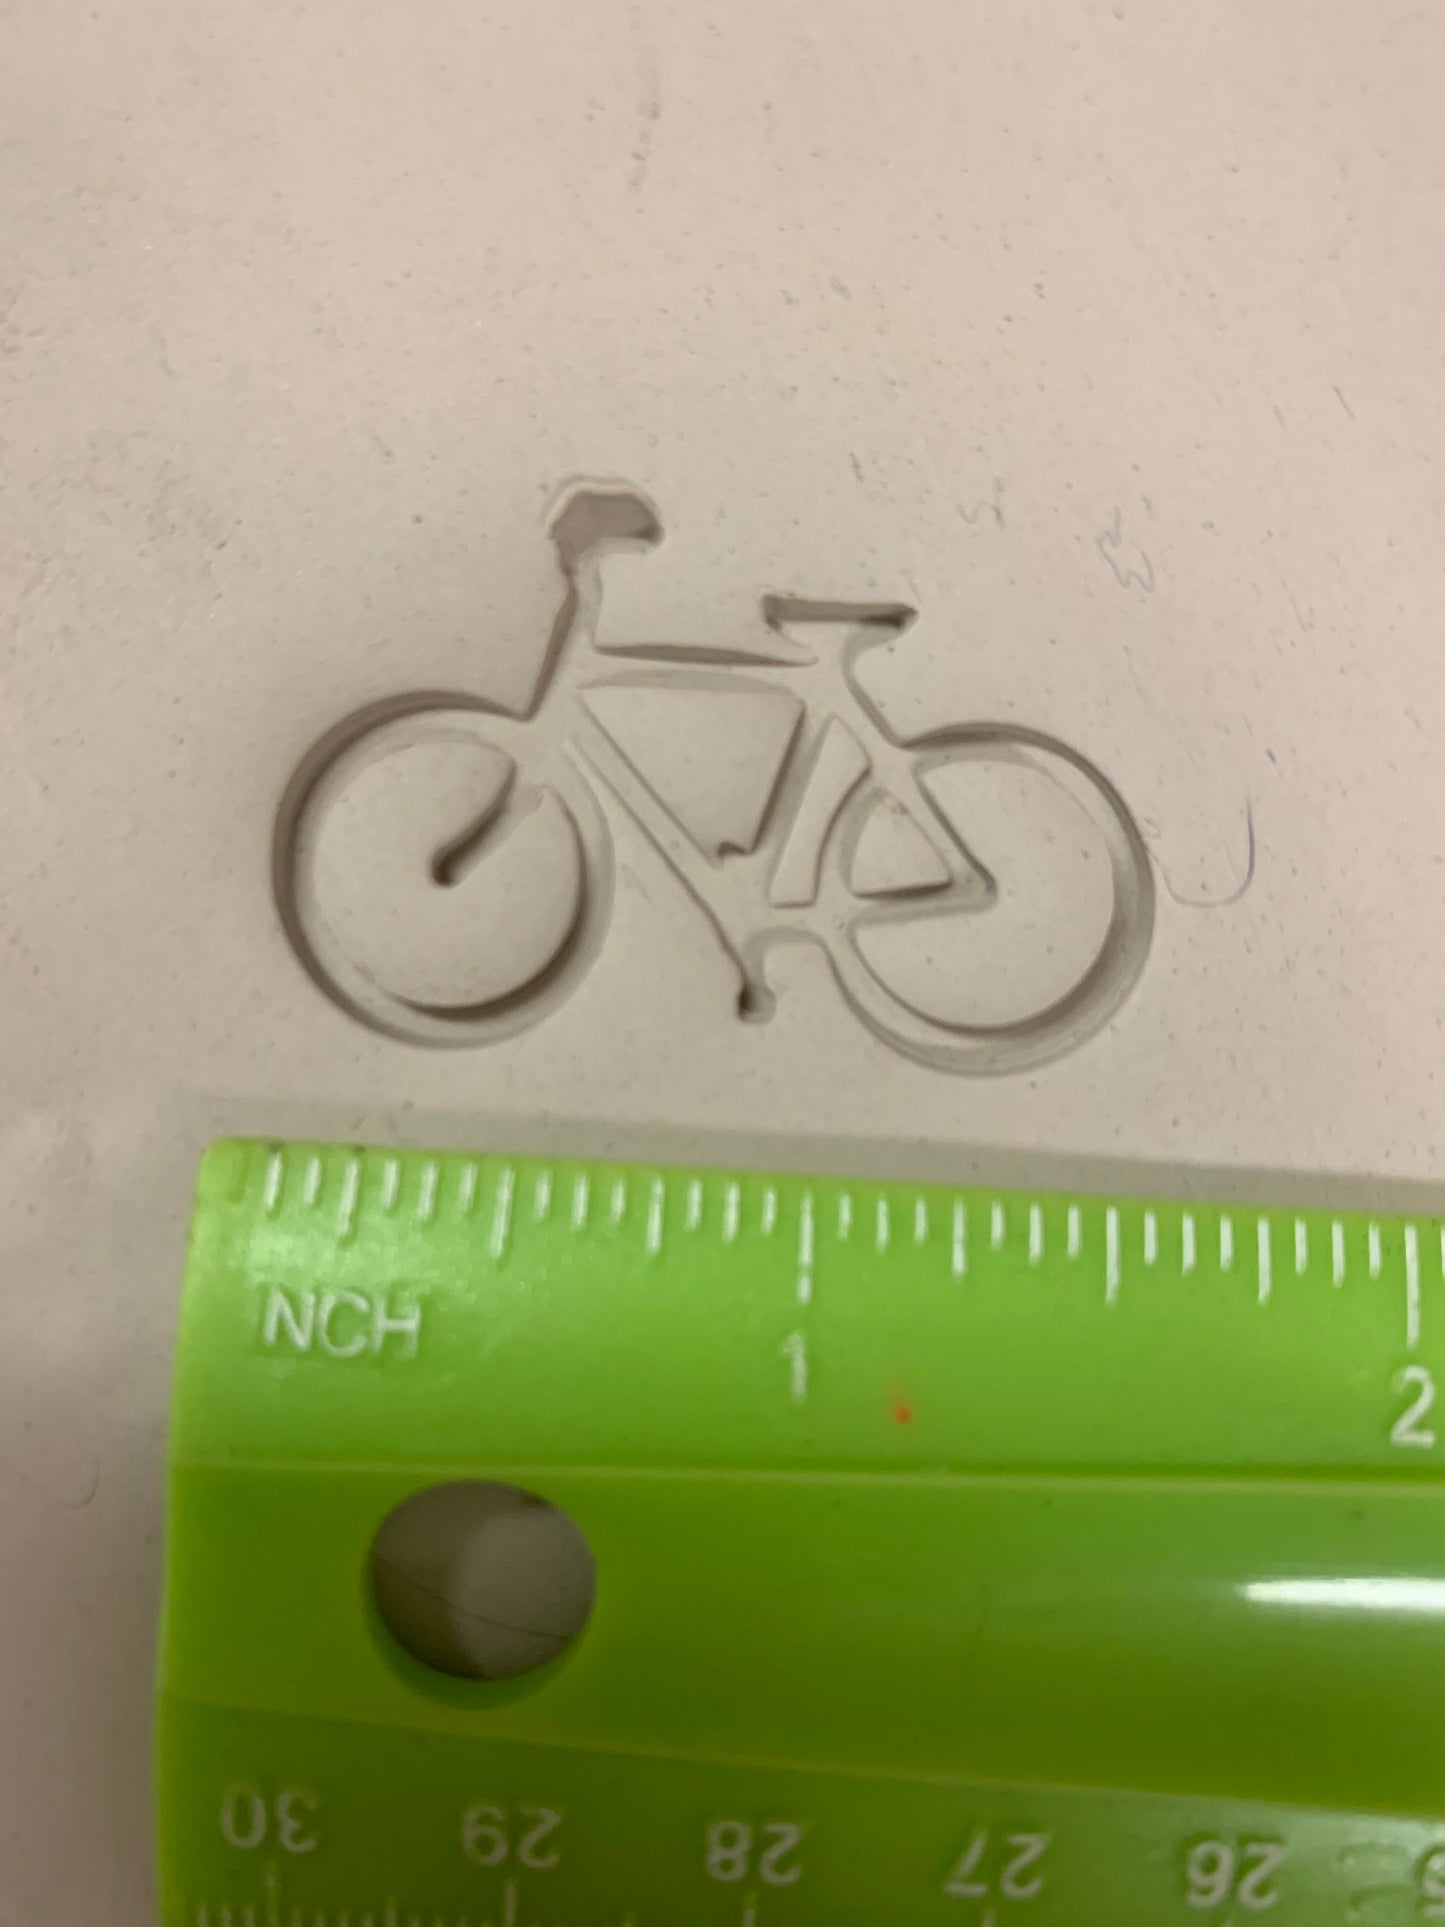 Pottery Stamp, Bike design, Fondant, Cookie Dough, leather, Clay, Pottery Tool, plastic 3d printed, multiple sizes available, Bicycle